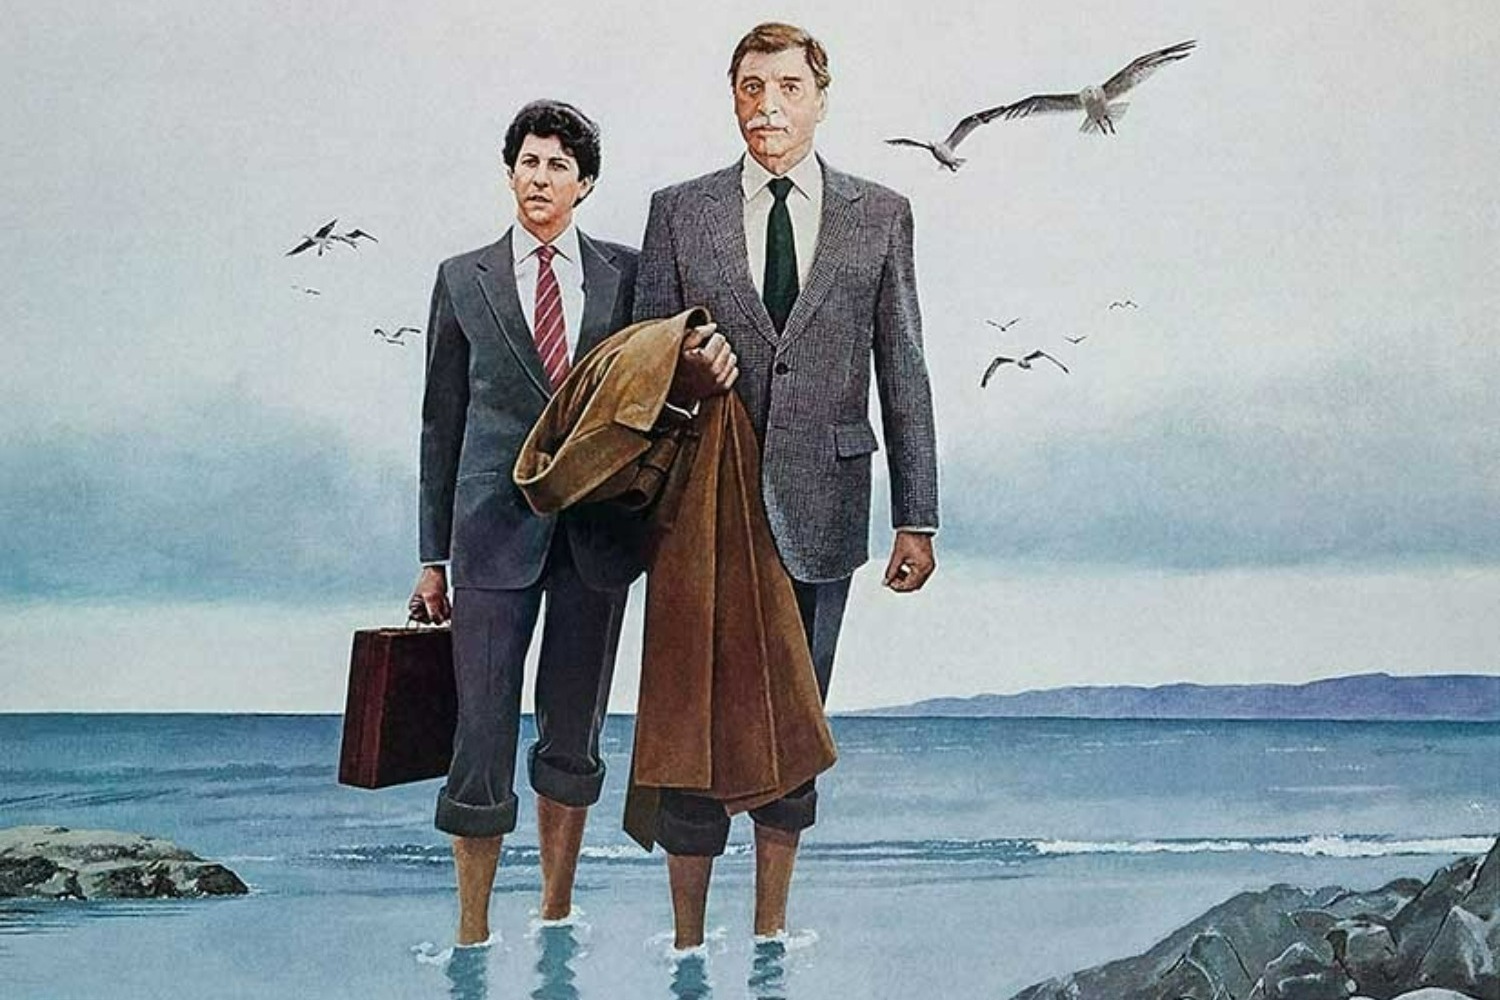 Two business men in suits hold coats and briefcases, stand in the sea with their trousers rolled-up above their ankles